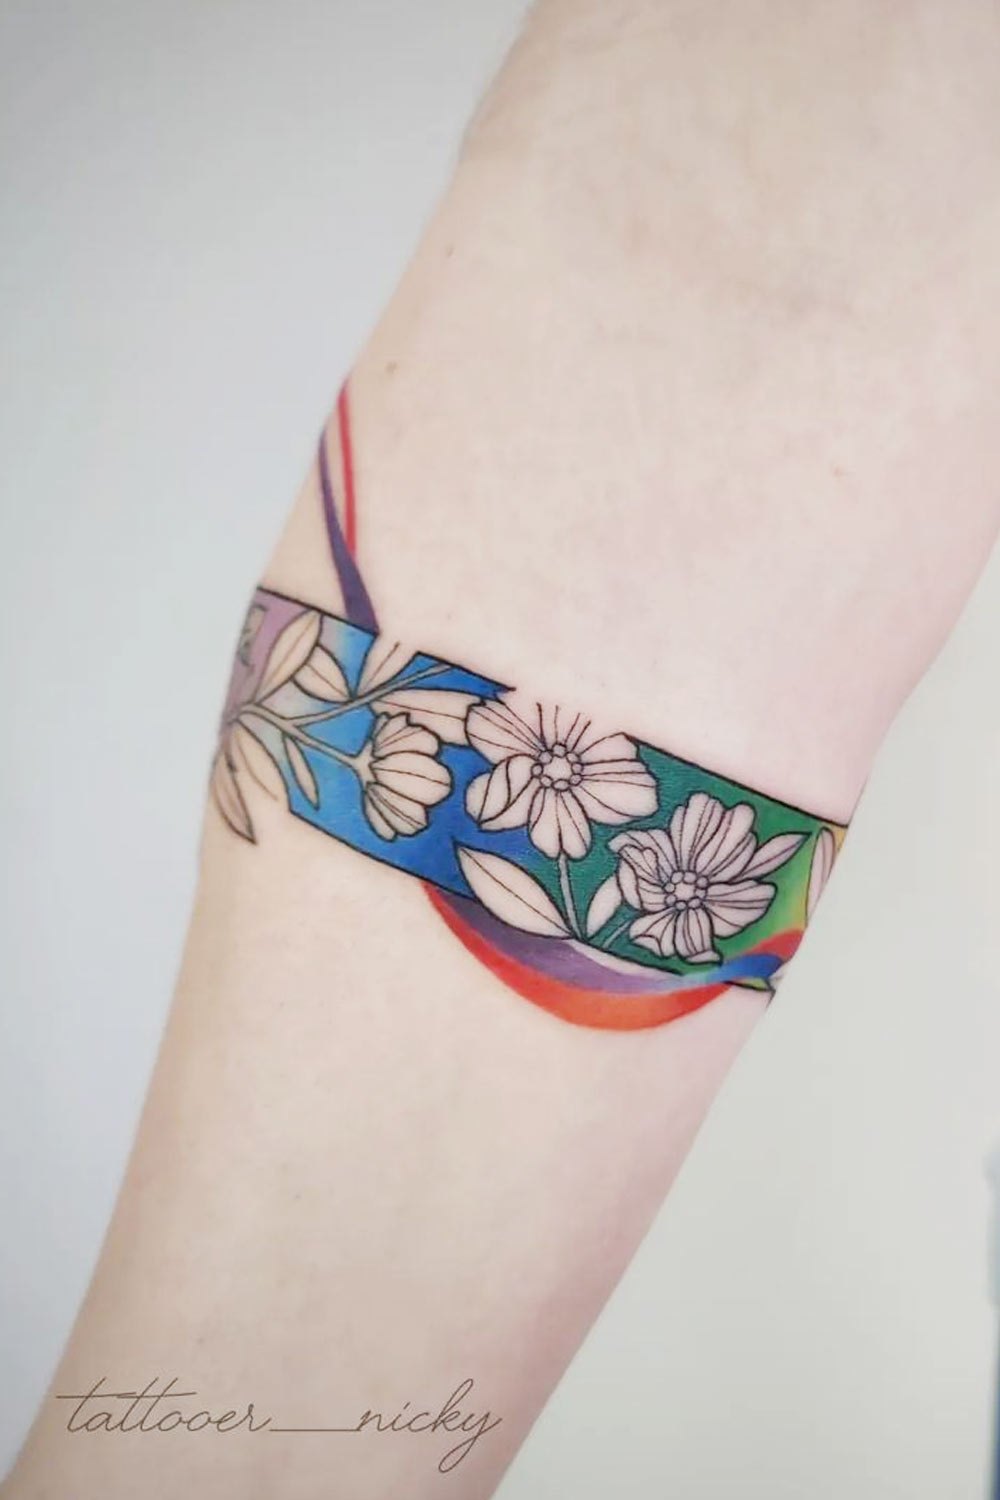 Flower Tattoo Designs to Emphasize Your Beauty - Glaminati